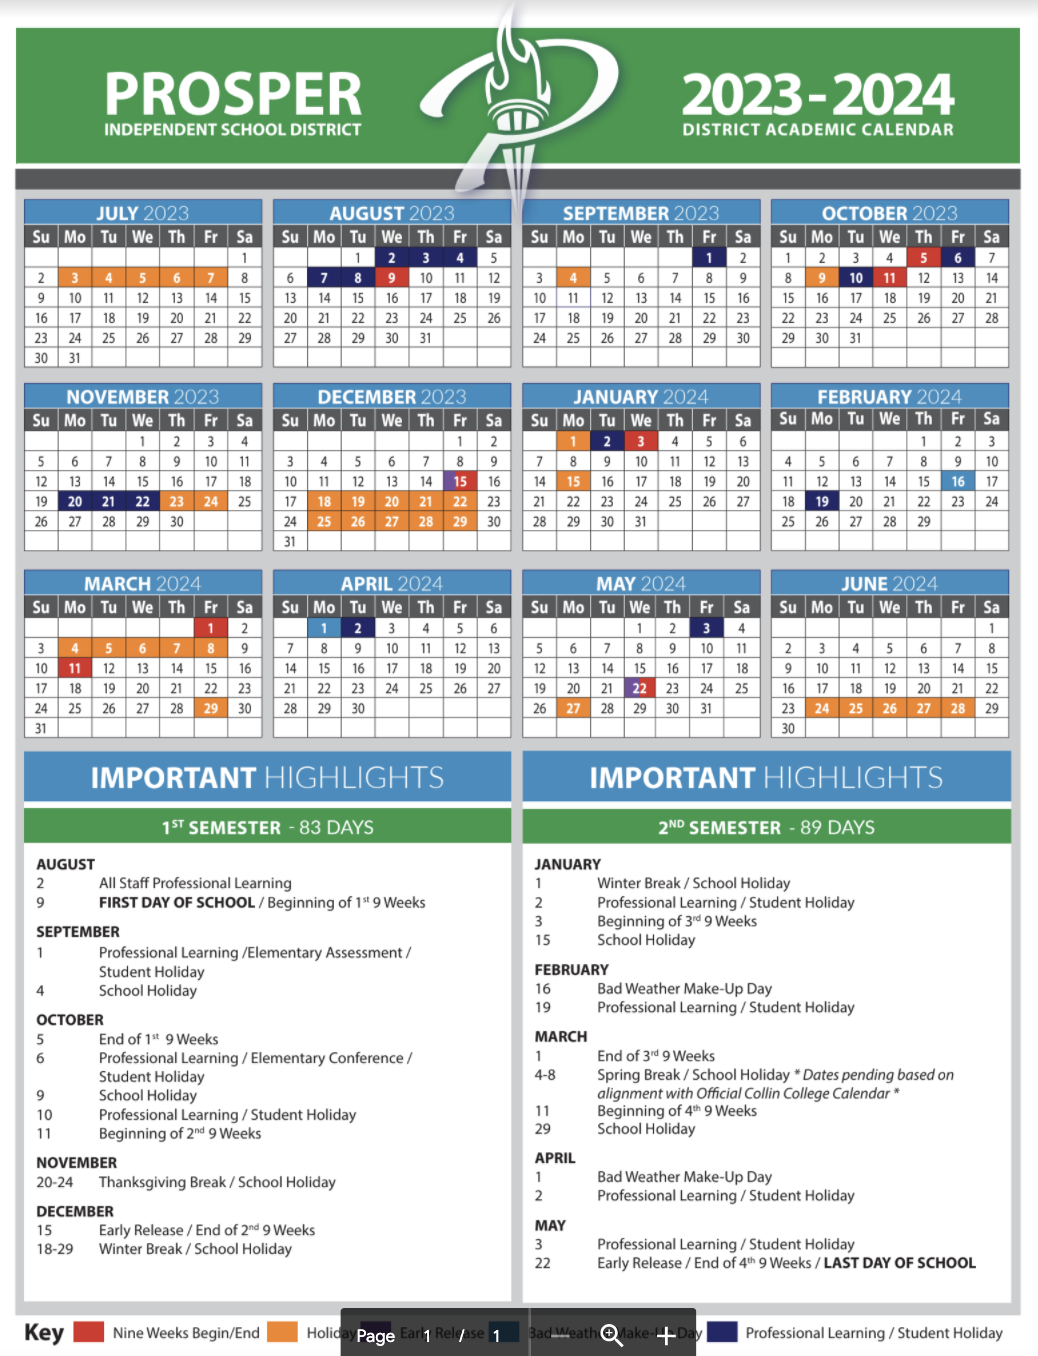 Frisco Isd 2022 23 Calendar Here Are Prosper Isd's School Calendars For The 2022-2023 And The 2023-2024  School Years | Cities | Checkoutdfw.com